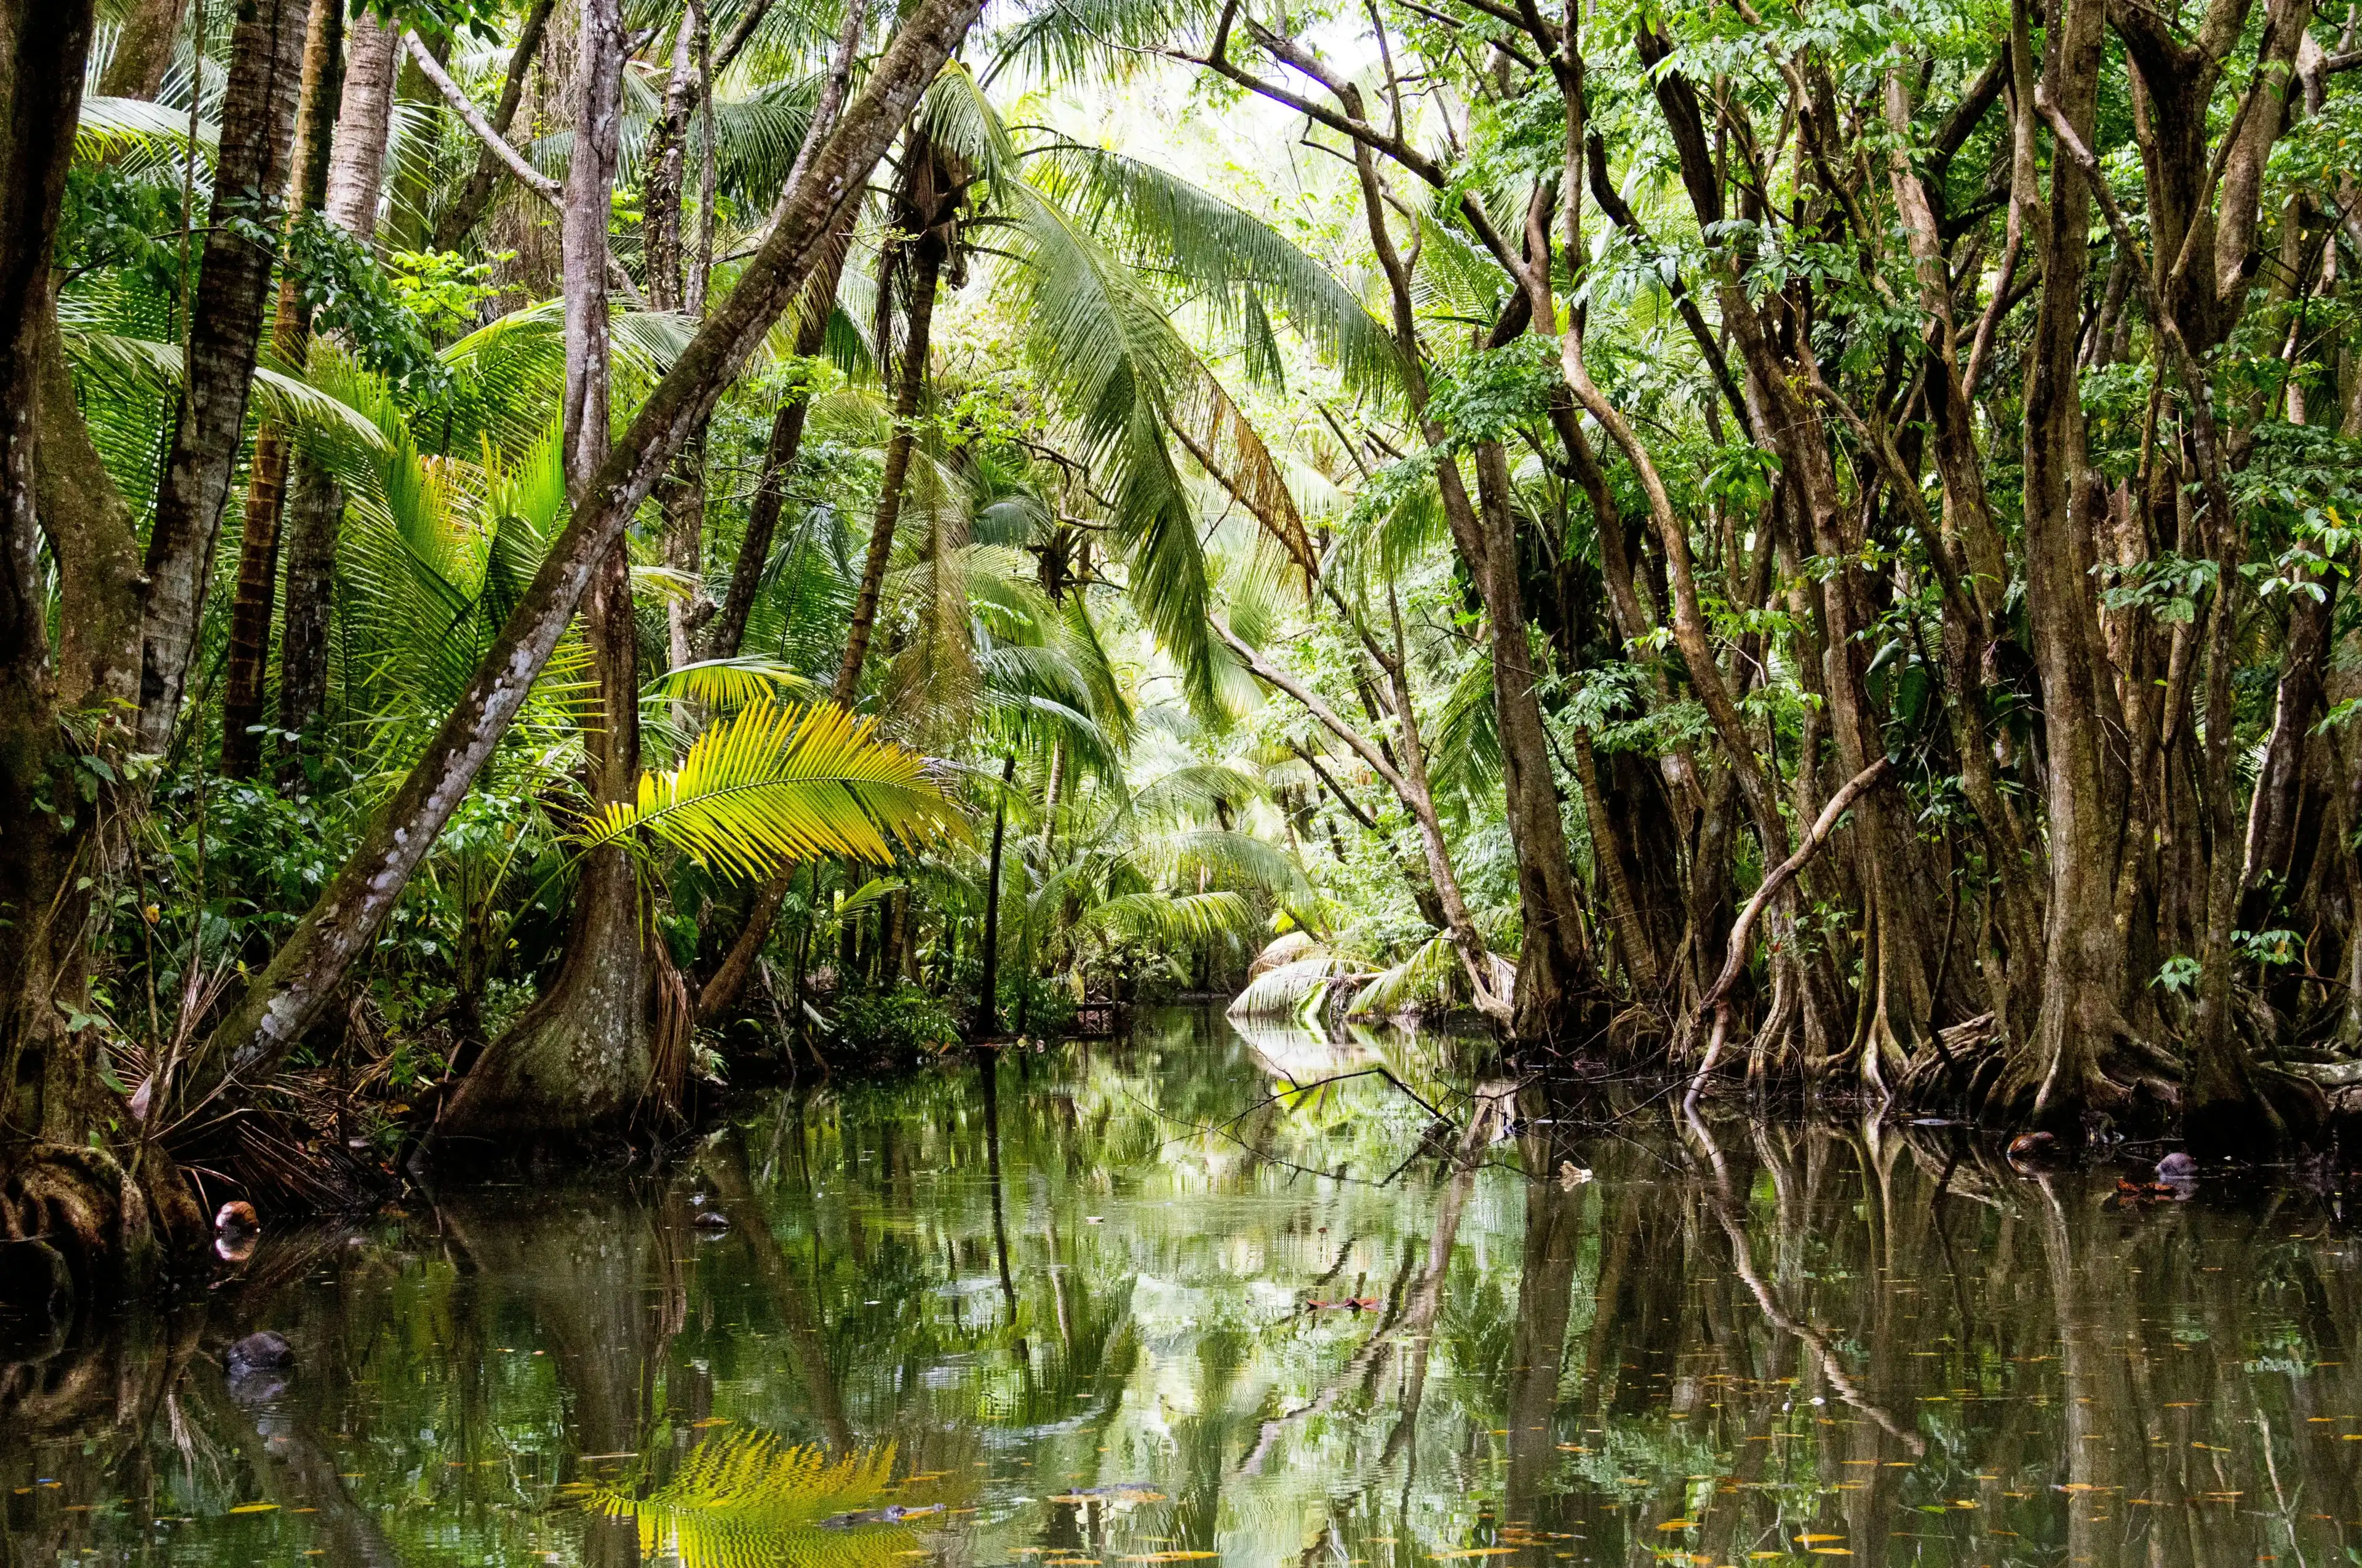 Indian River in Dominica, a mangrove-lined river in near the city of Portsmouth.